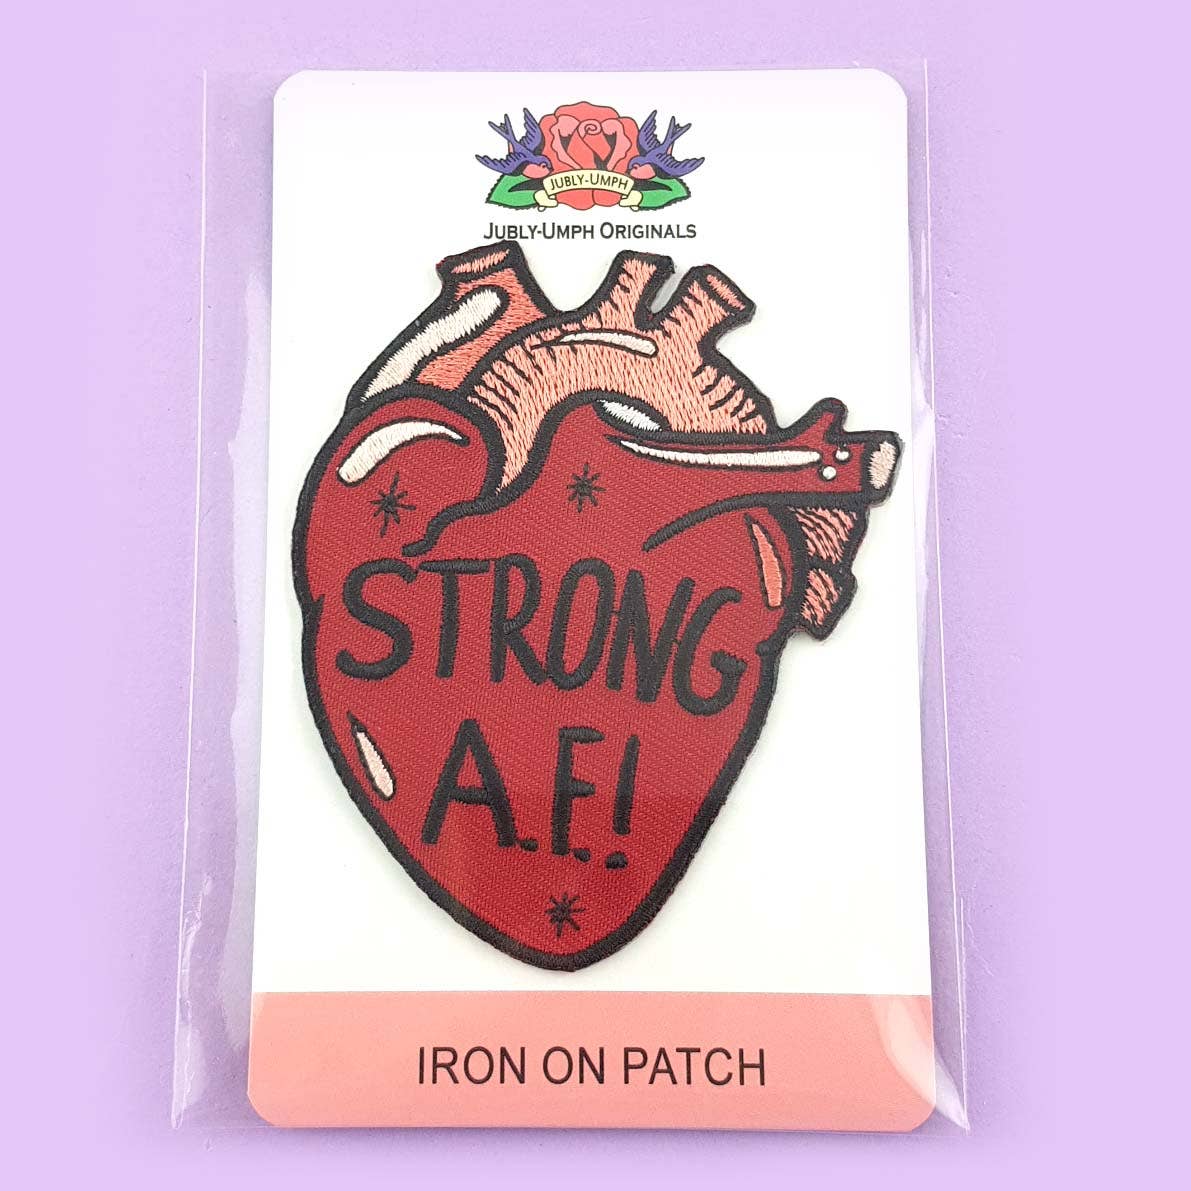 Strong A.F. Embroidered Iron On Patch | Artist-Designed in Australia